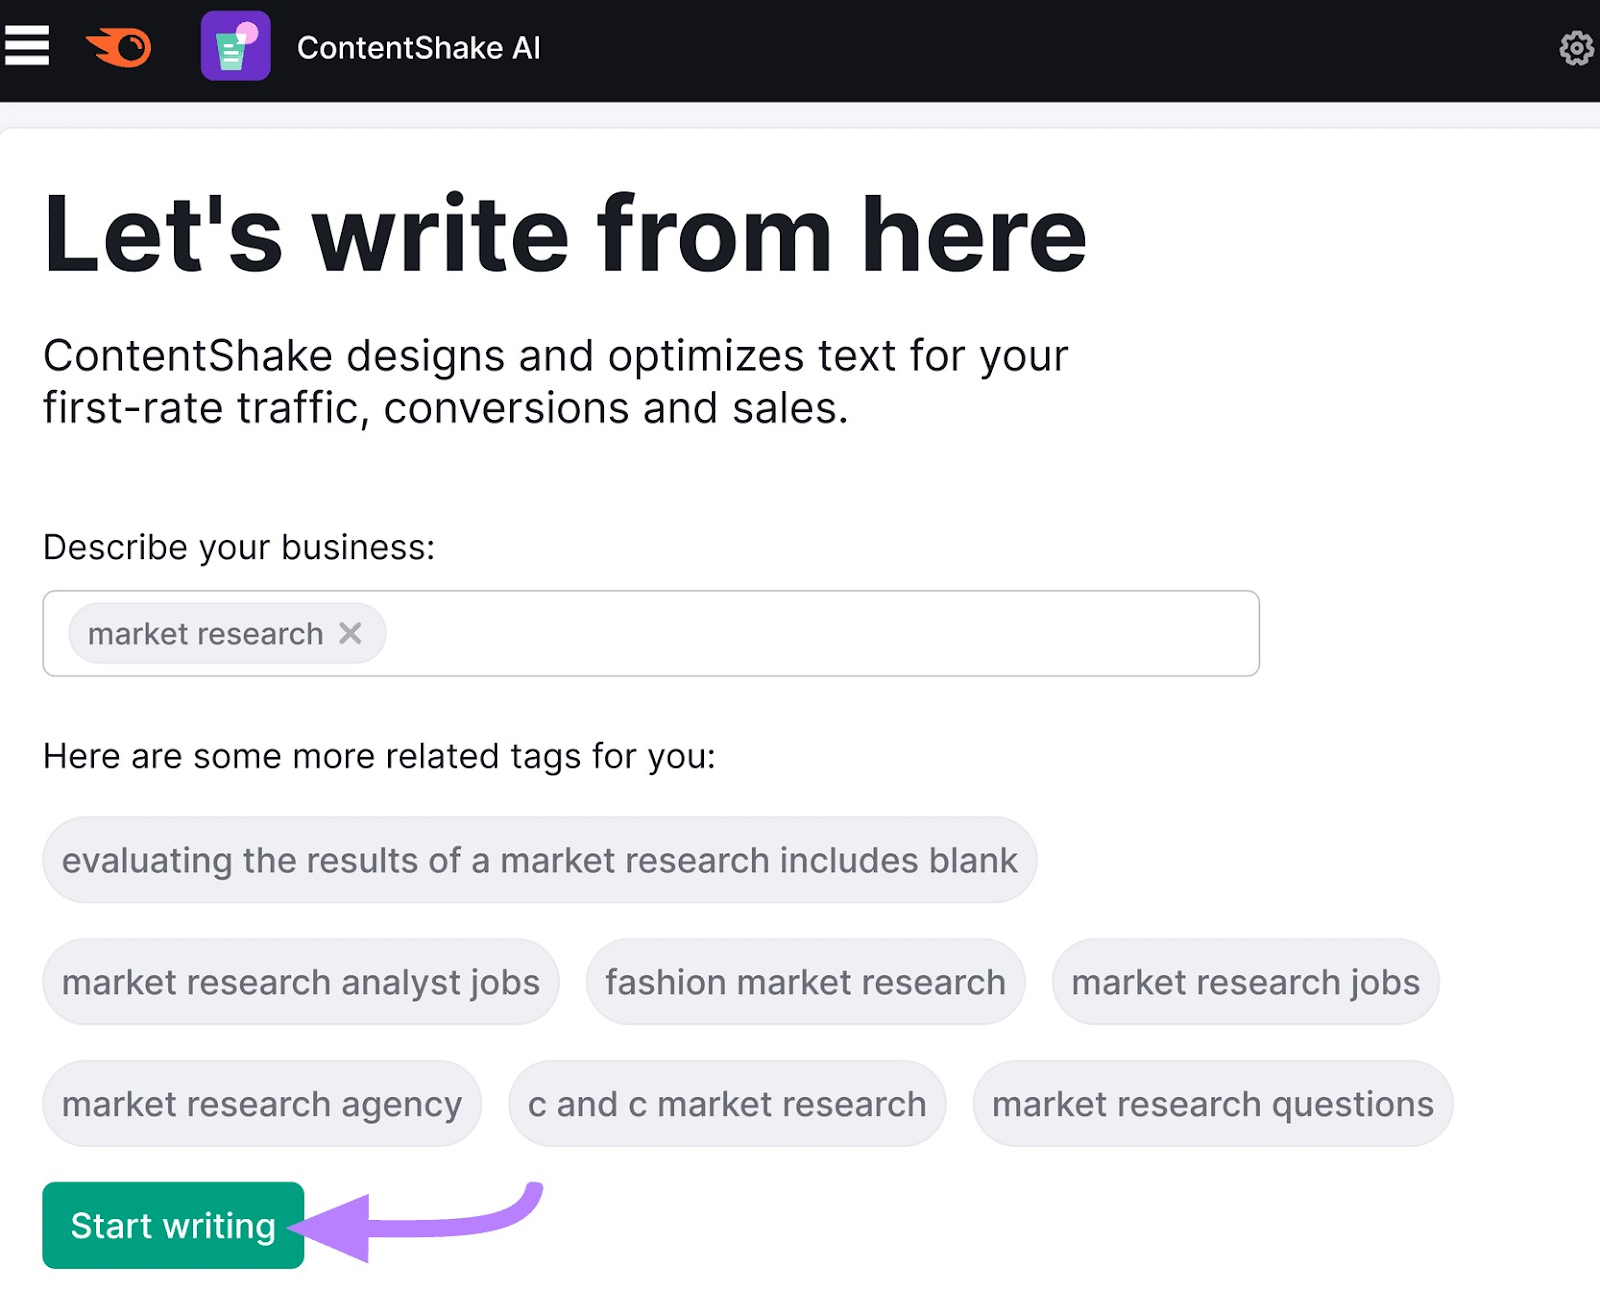 "Let's write from here" ContentShake AI set up